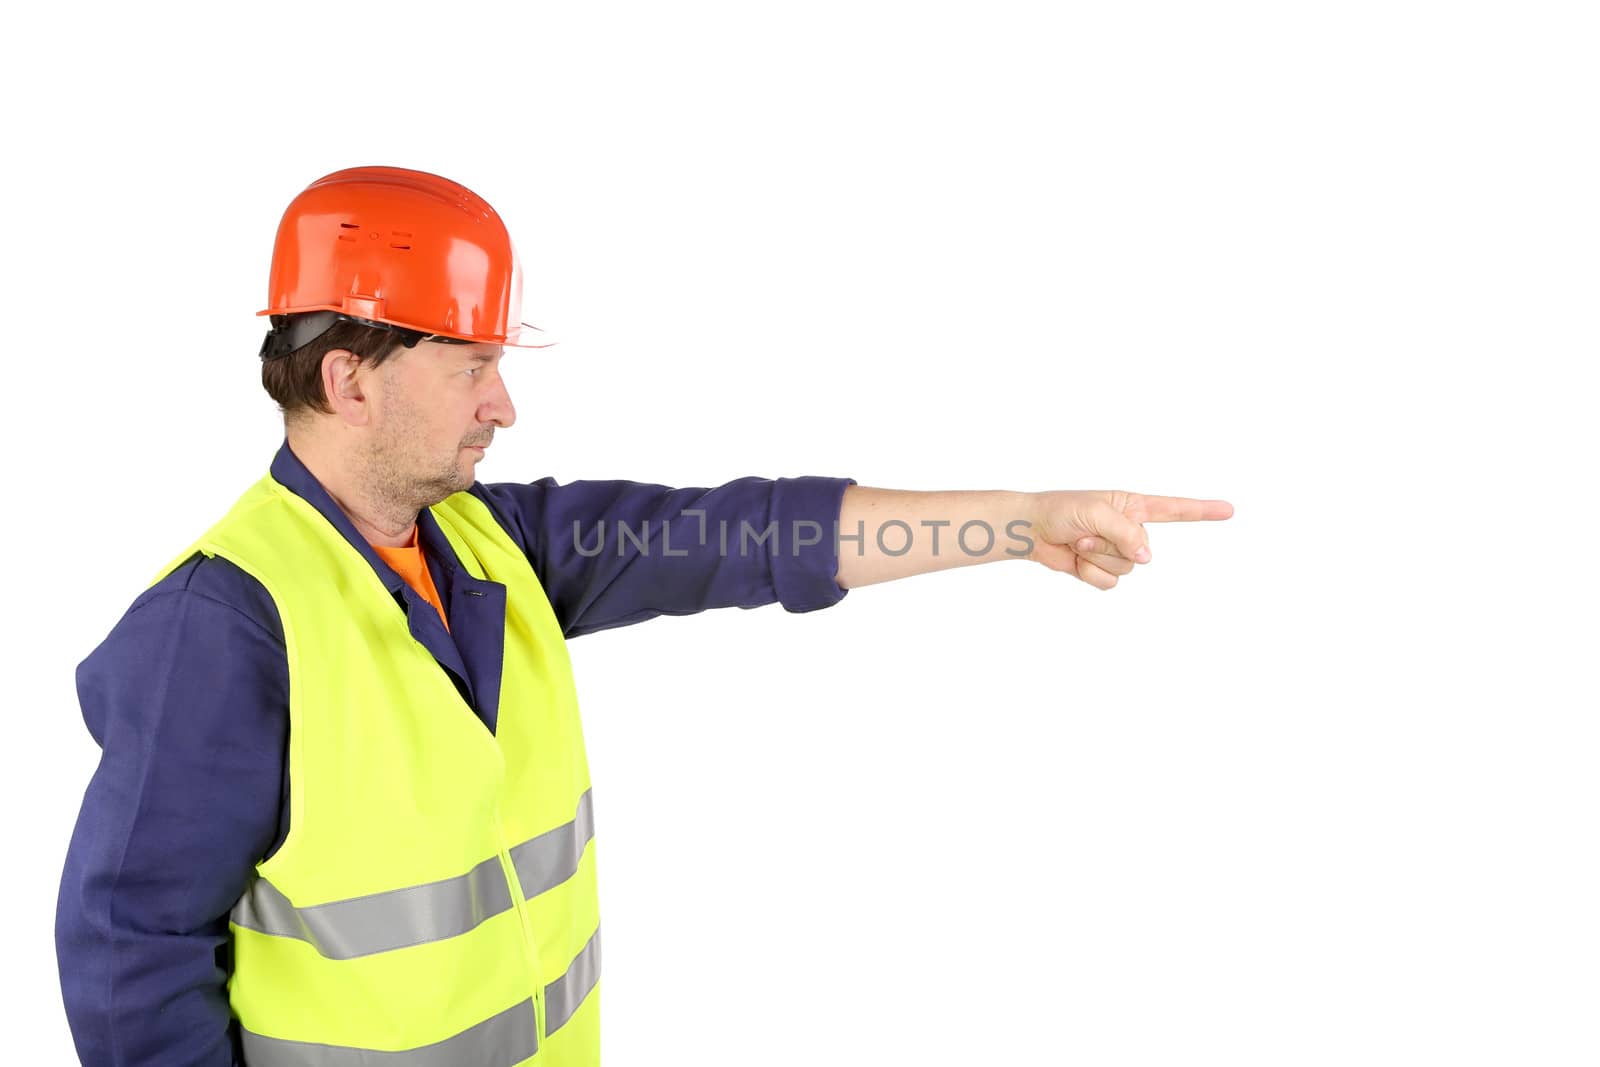 Worker in hard hat with hand up by indigolotos